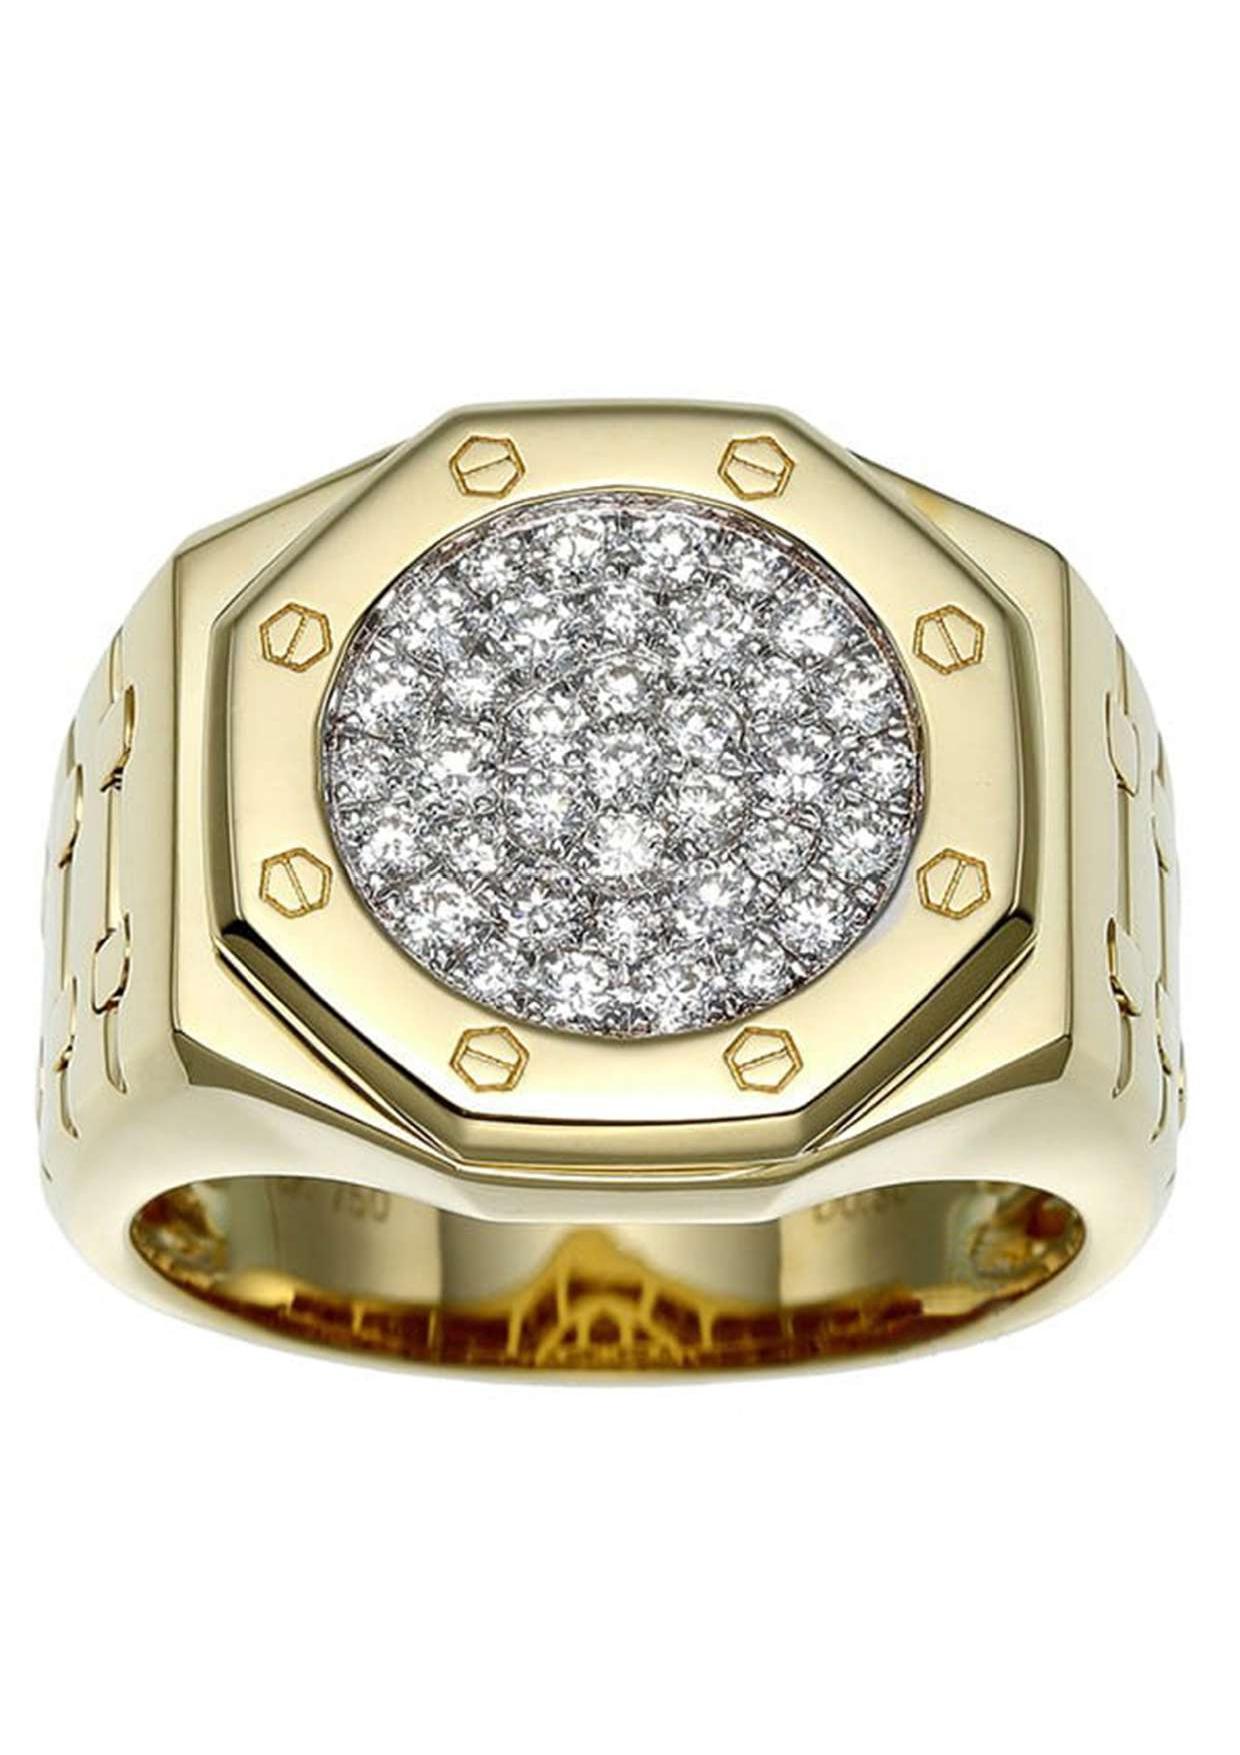 Round Cut 18K Yellow Gold Clock-Shaped Diamond Ring, 0.80ct, Size 11.25 For Sale